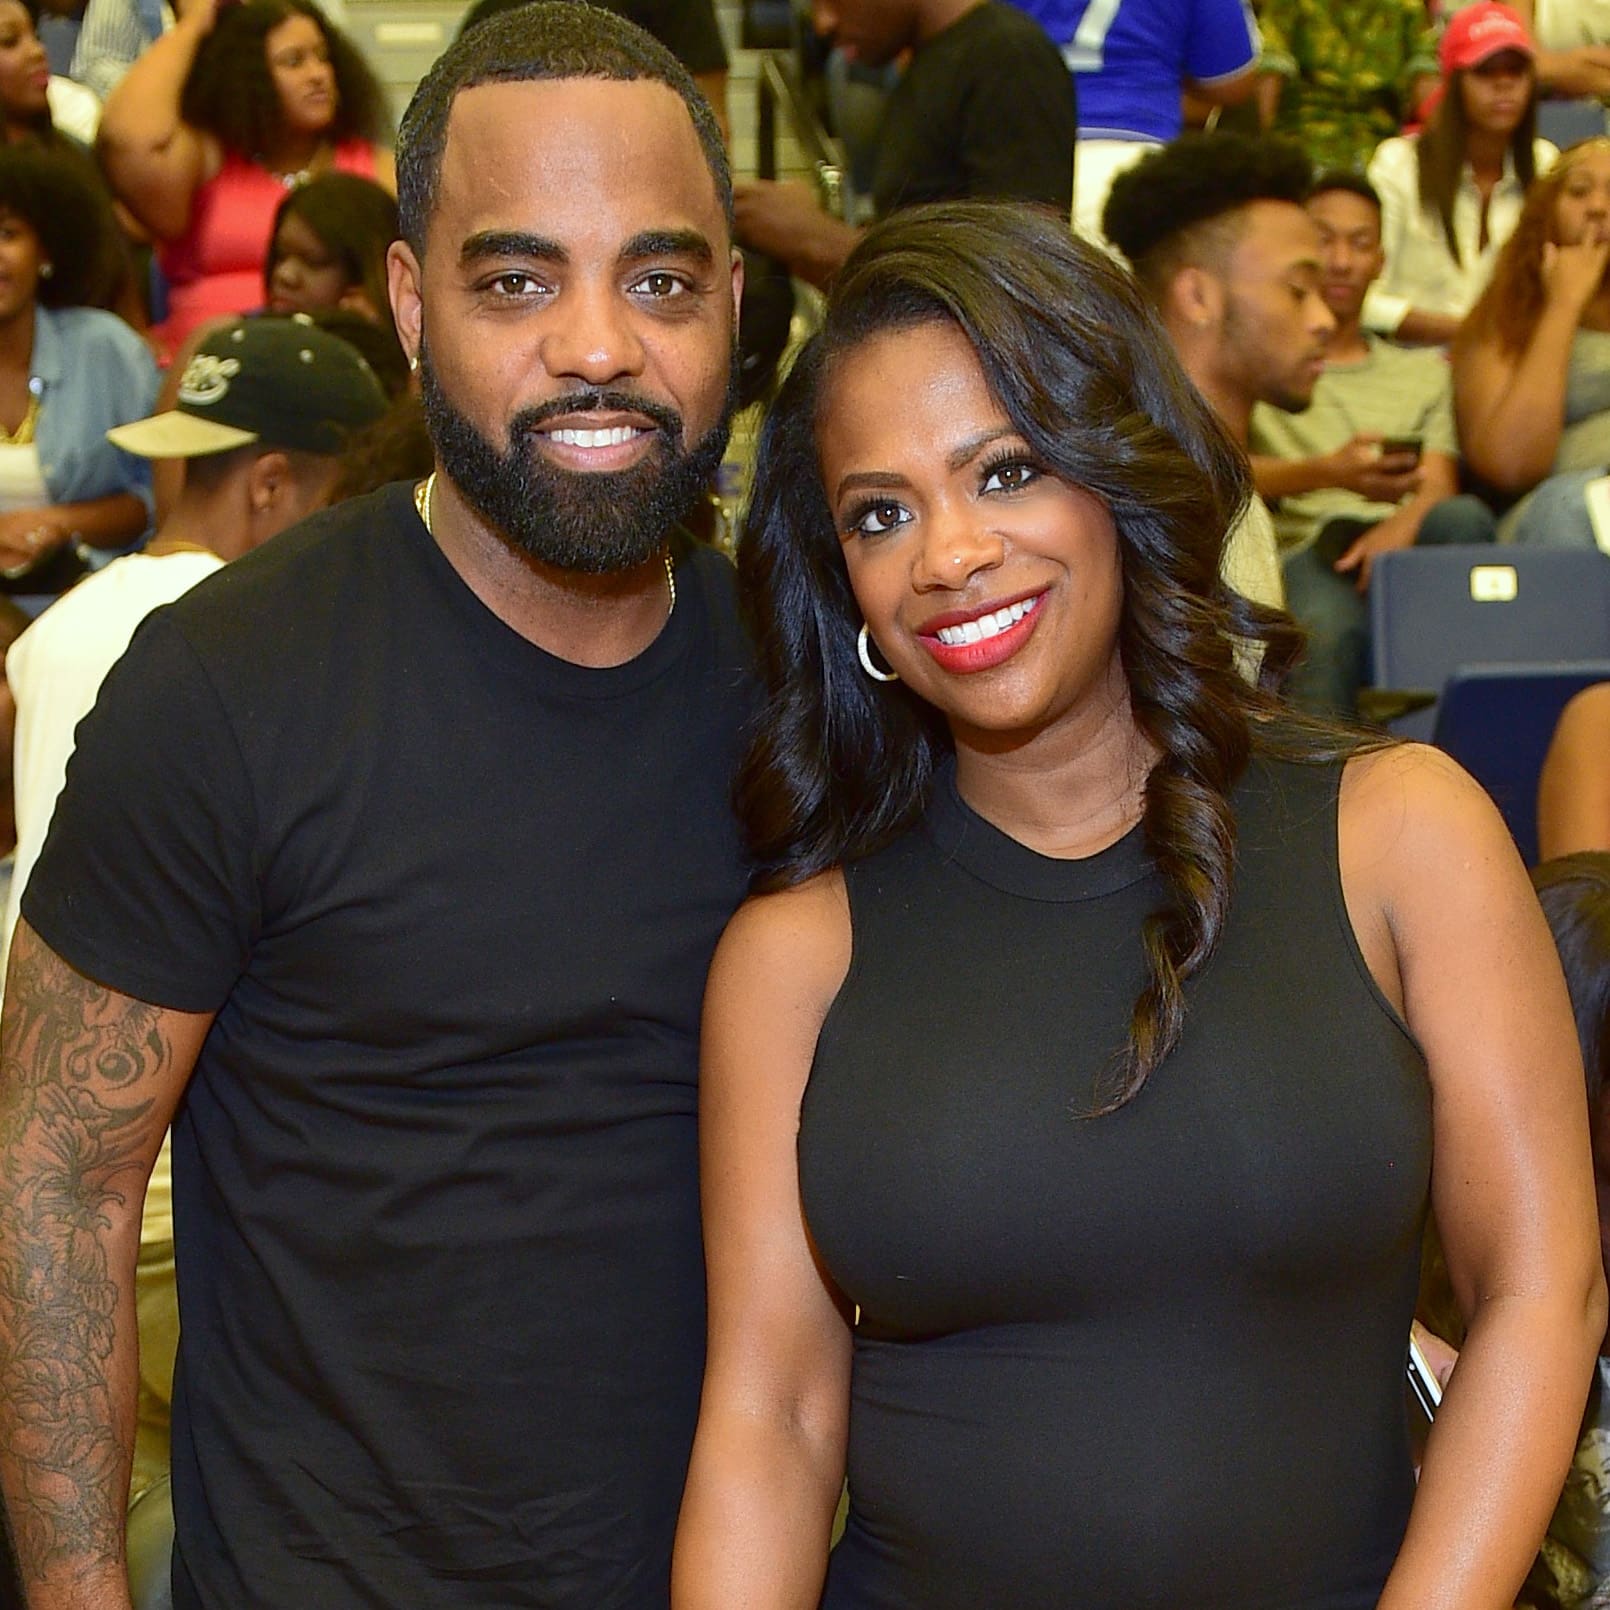 Kandi Burruss And Todd Tucker Create A Dating Game - See Their Video